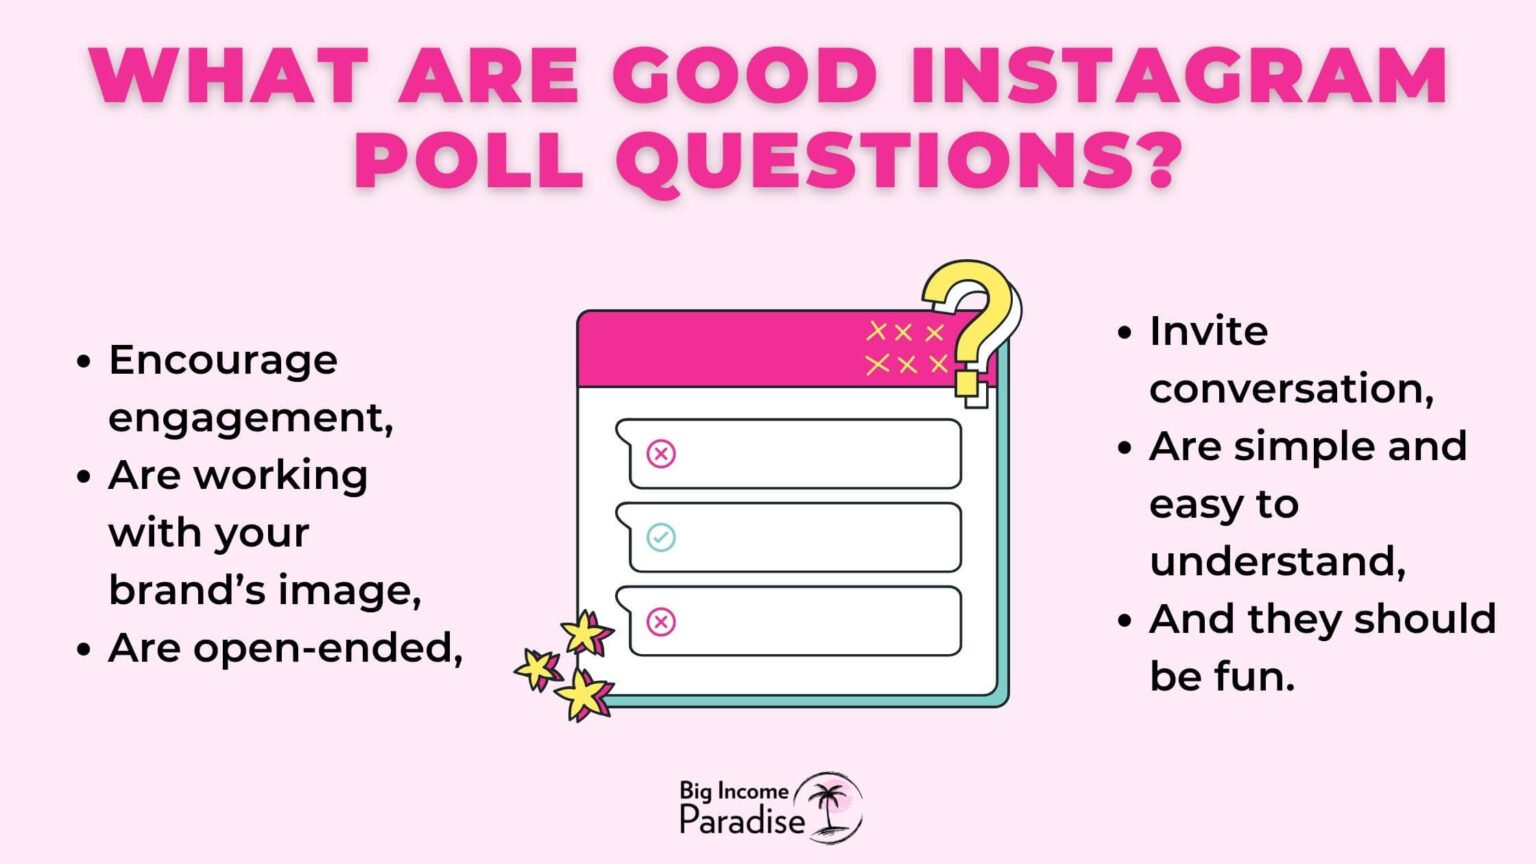 The Best 53 Instagram Poll Questions To Ask Your Followers